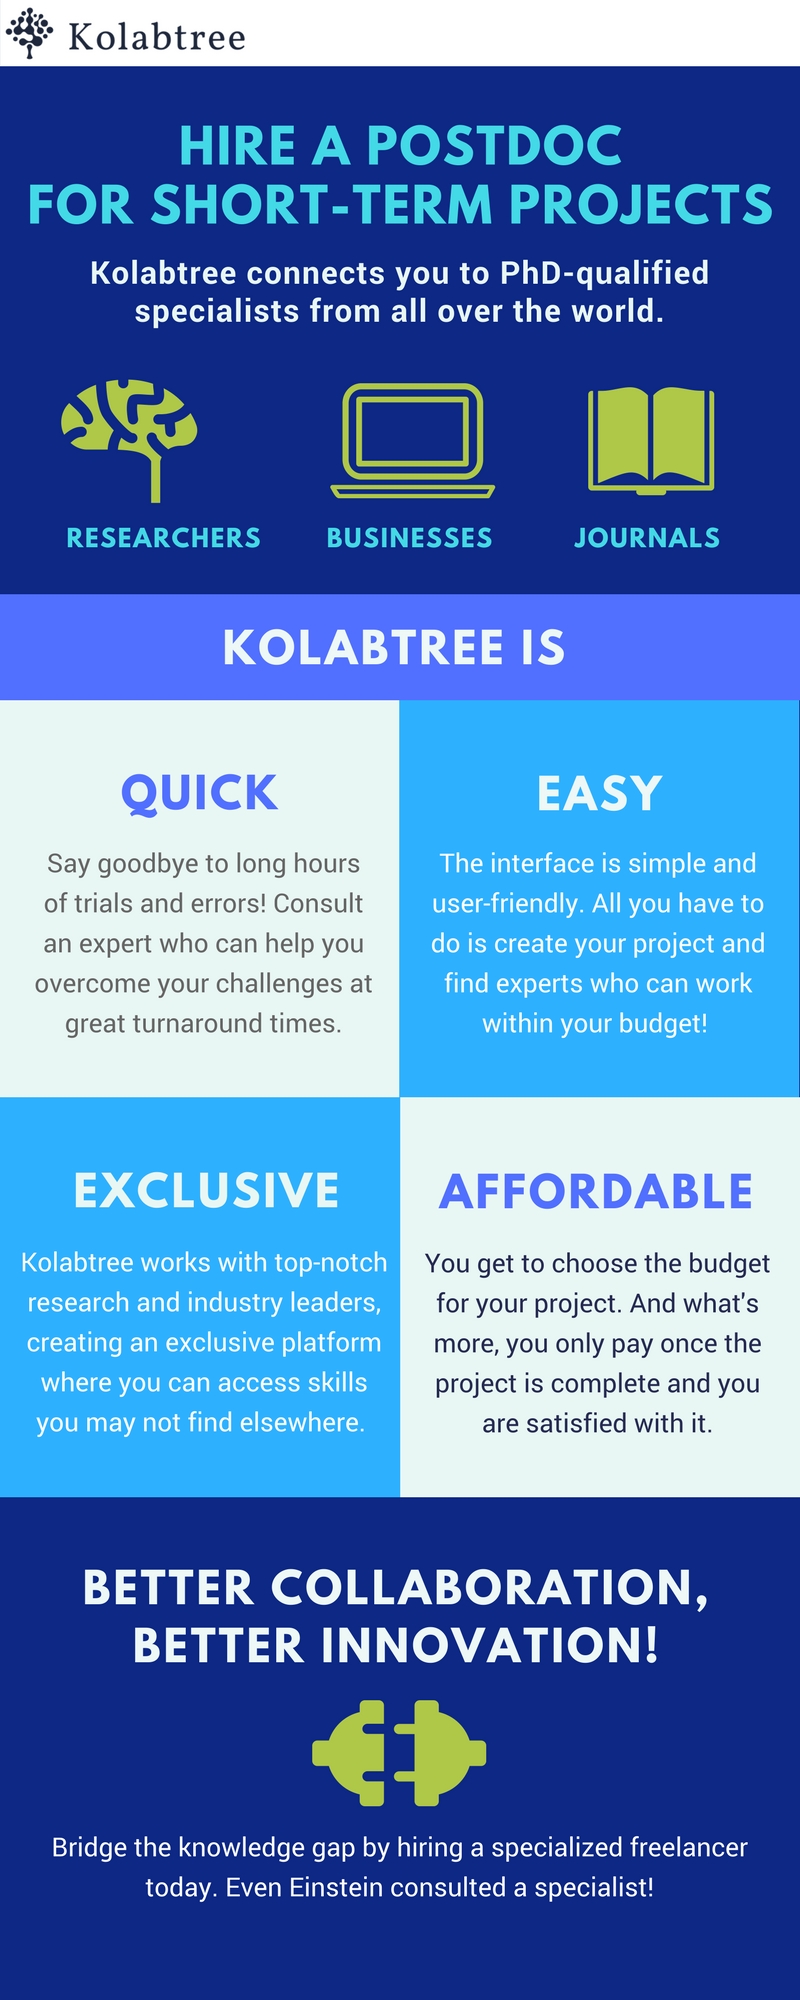 Kolabtree connects businesses and labs with freelance PhD-qualified scientists all over the world.